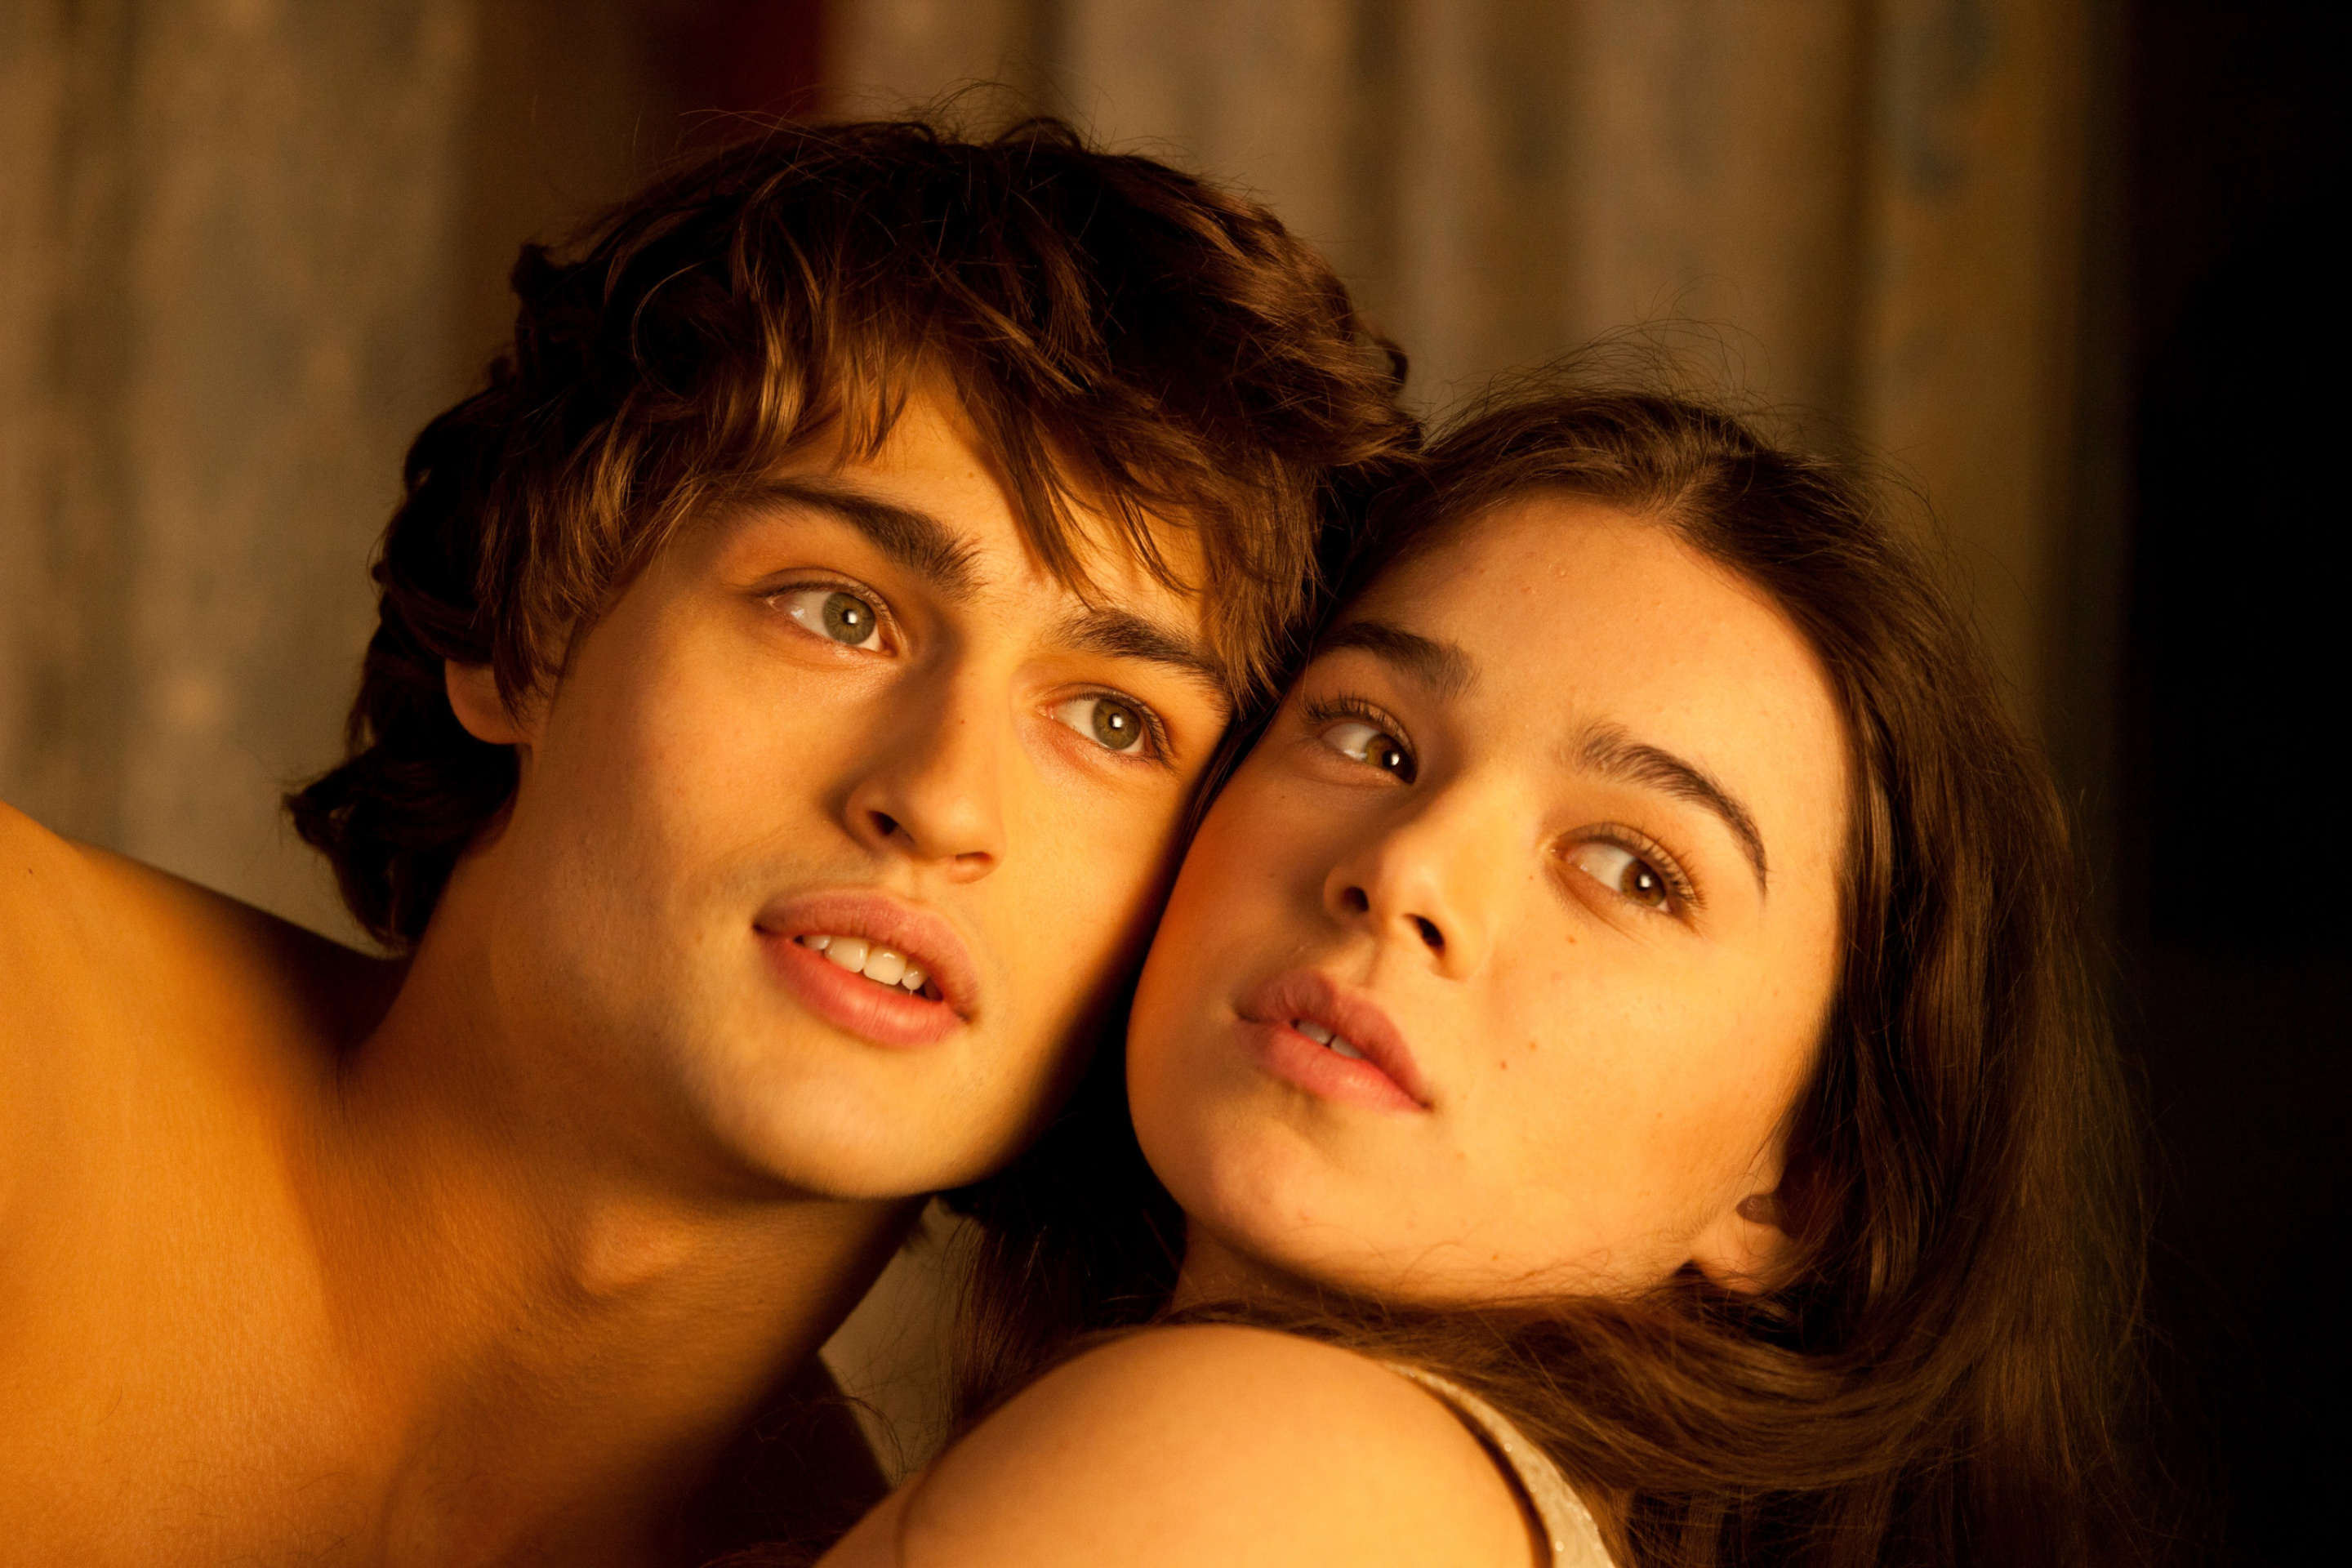 Das Romeo and Juliet with Hailee Steinfeld and Douglas Booth Wallpaper 2880x1920